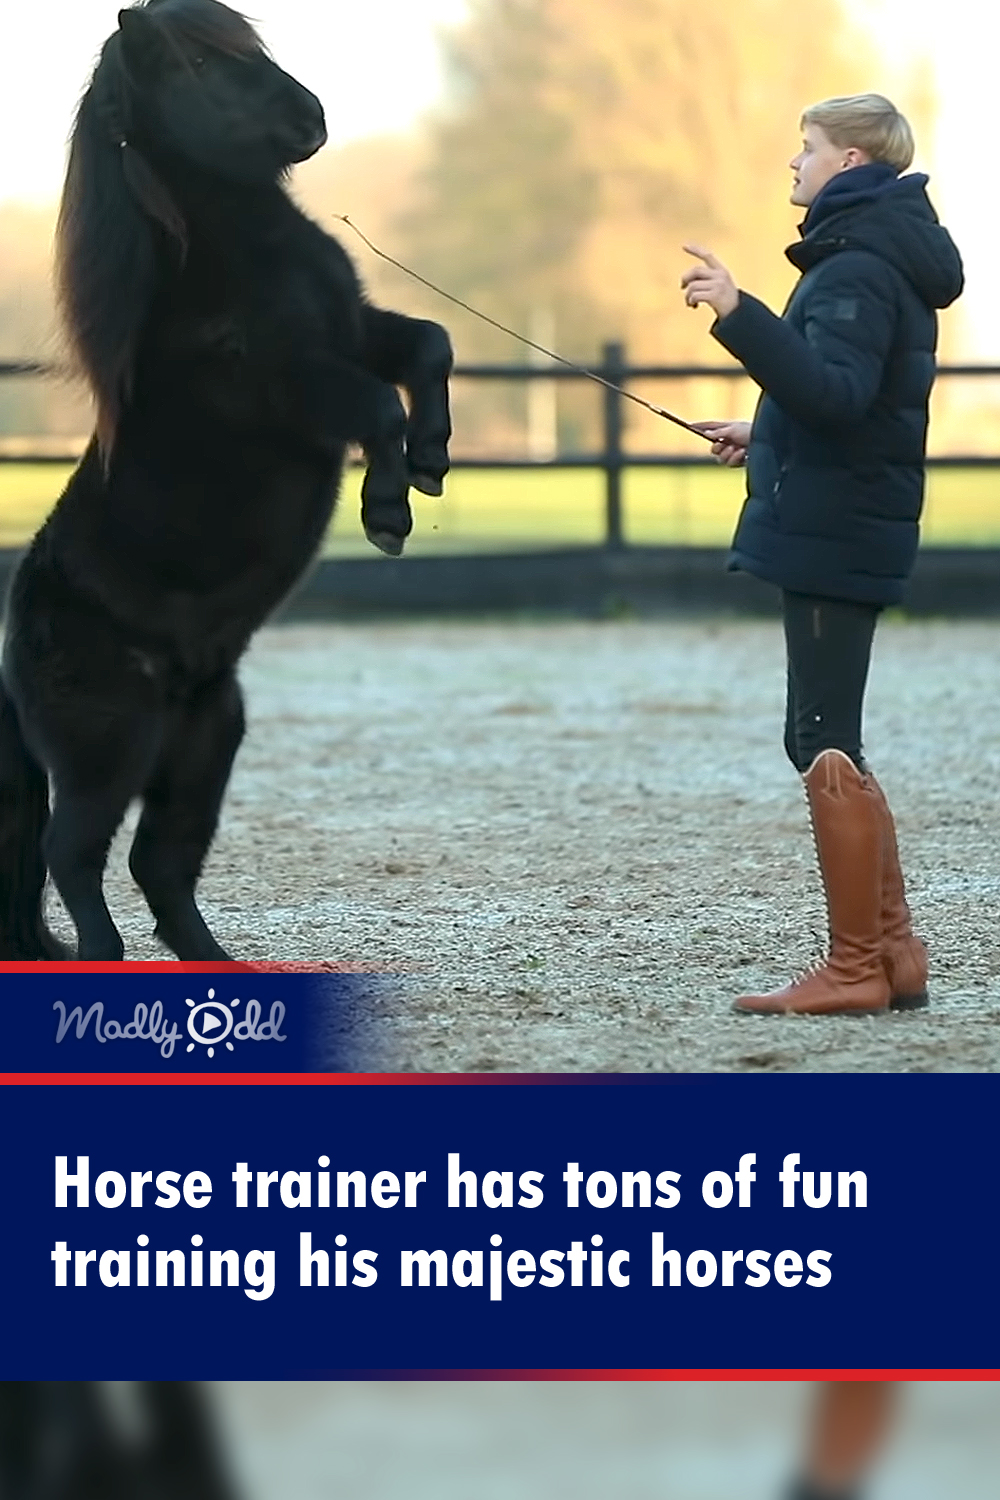 Horse trainer has tons of fun training his majestic horses